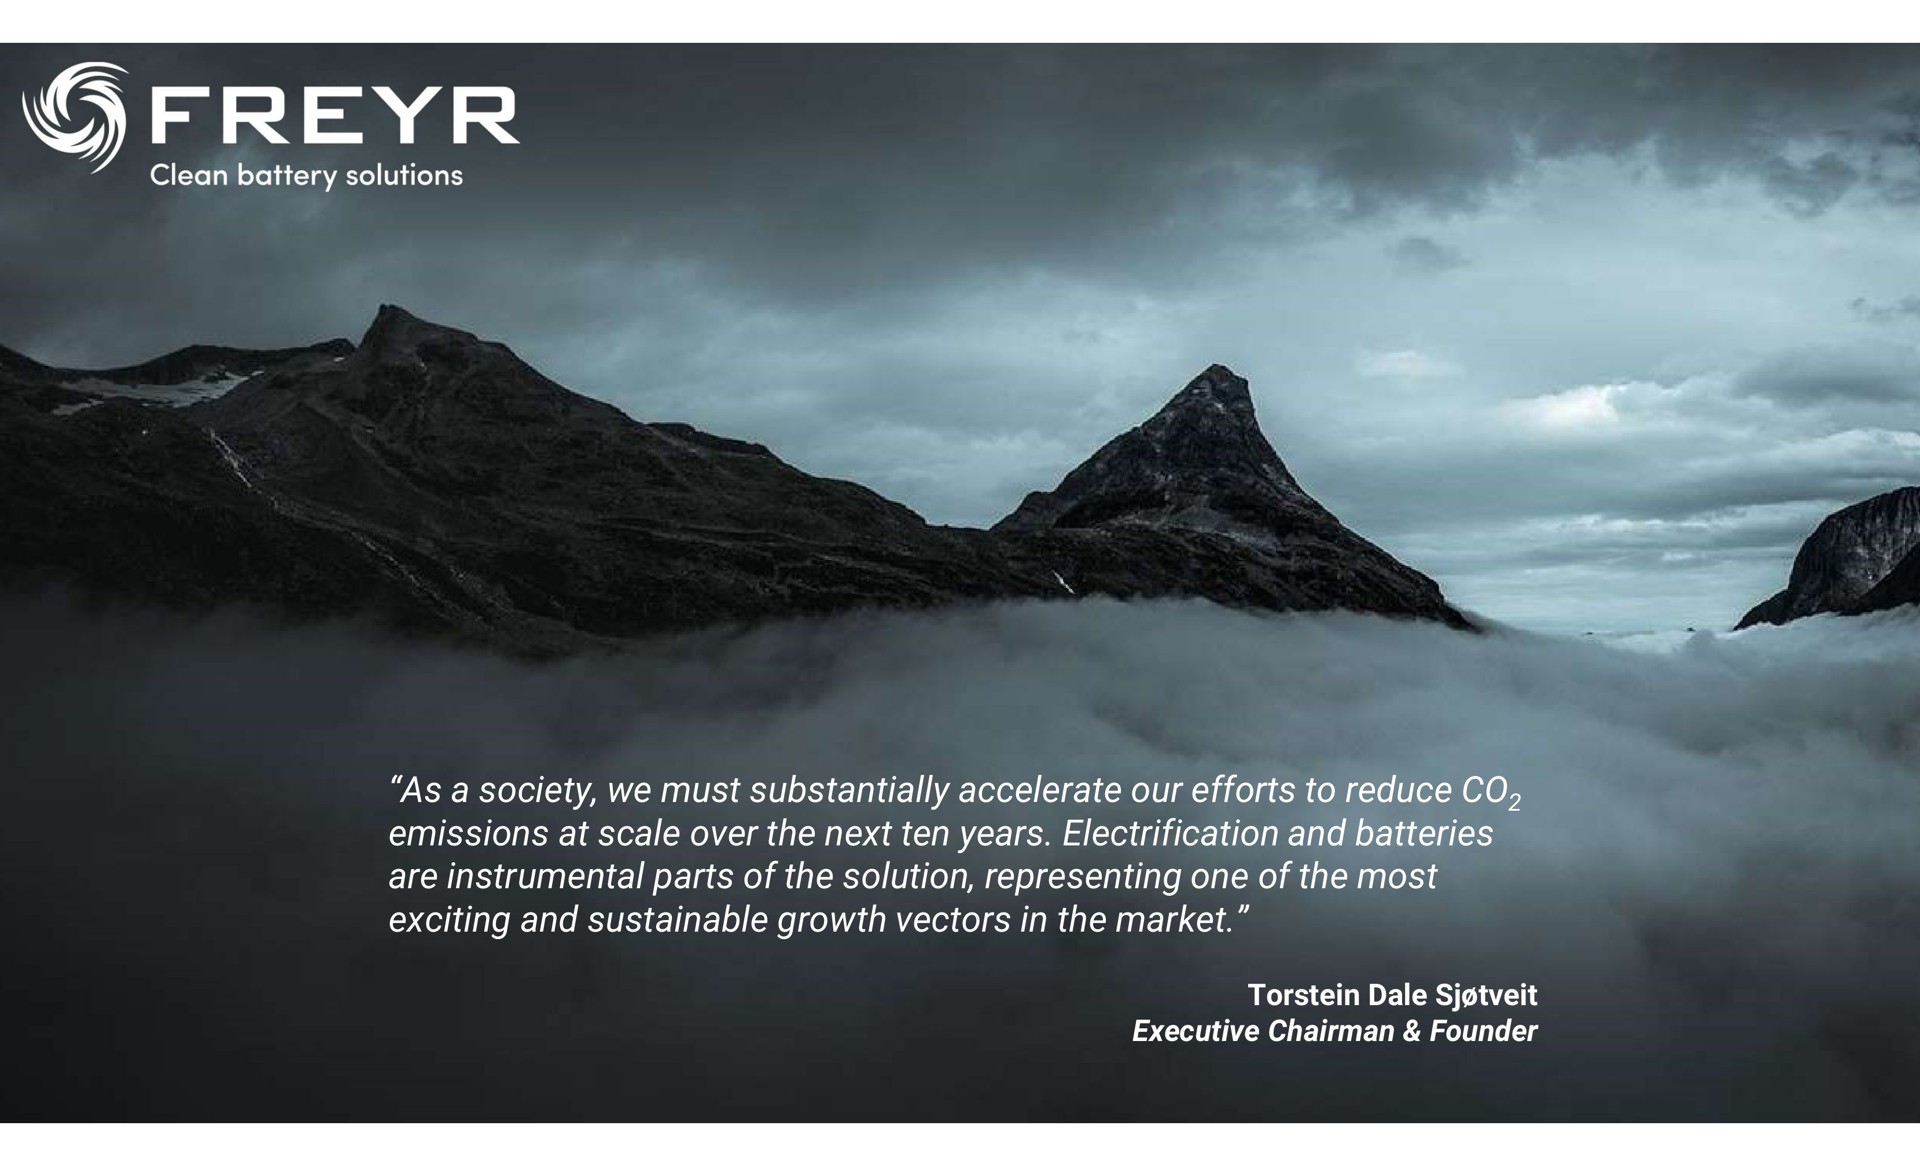 as a society we must substantially accelerate our efforts to reduce emissions at scale over the next ten years electrification and batteries are instrumental parts of the solution representing one of the most exciting and sustainable growth vectors in the market | Freyr